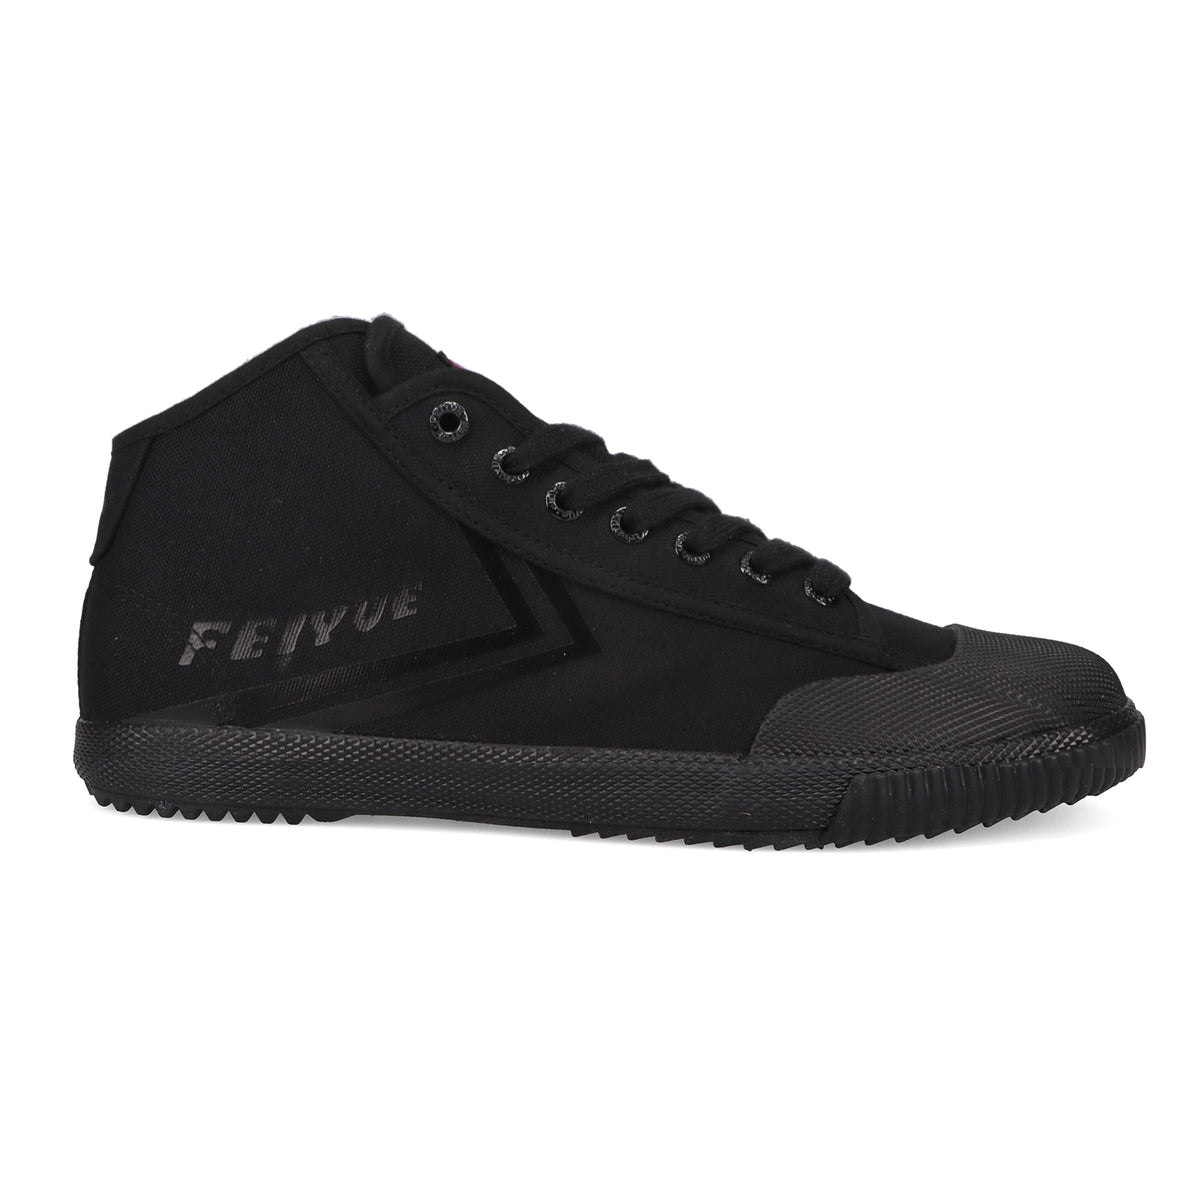 Black Mid-Top Sneaker with Lace-Up Closure